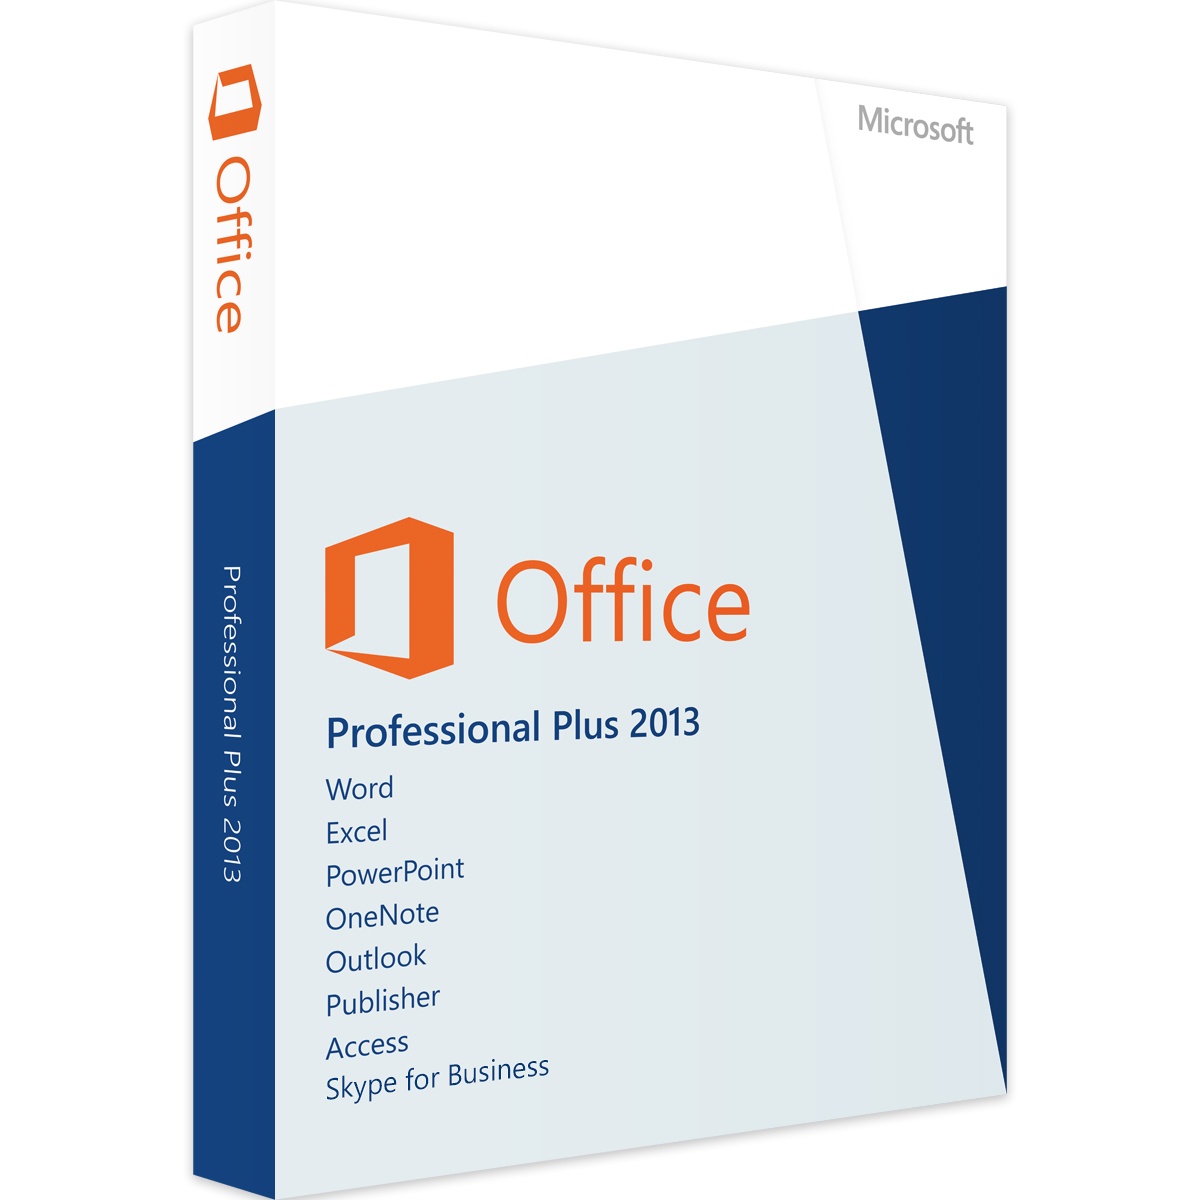 activating microsoft office 2013 professional plus